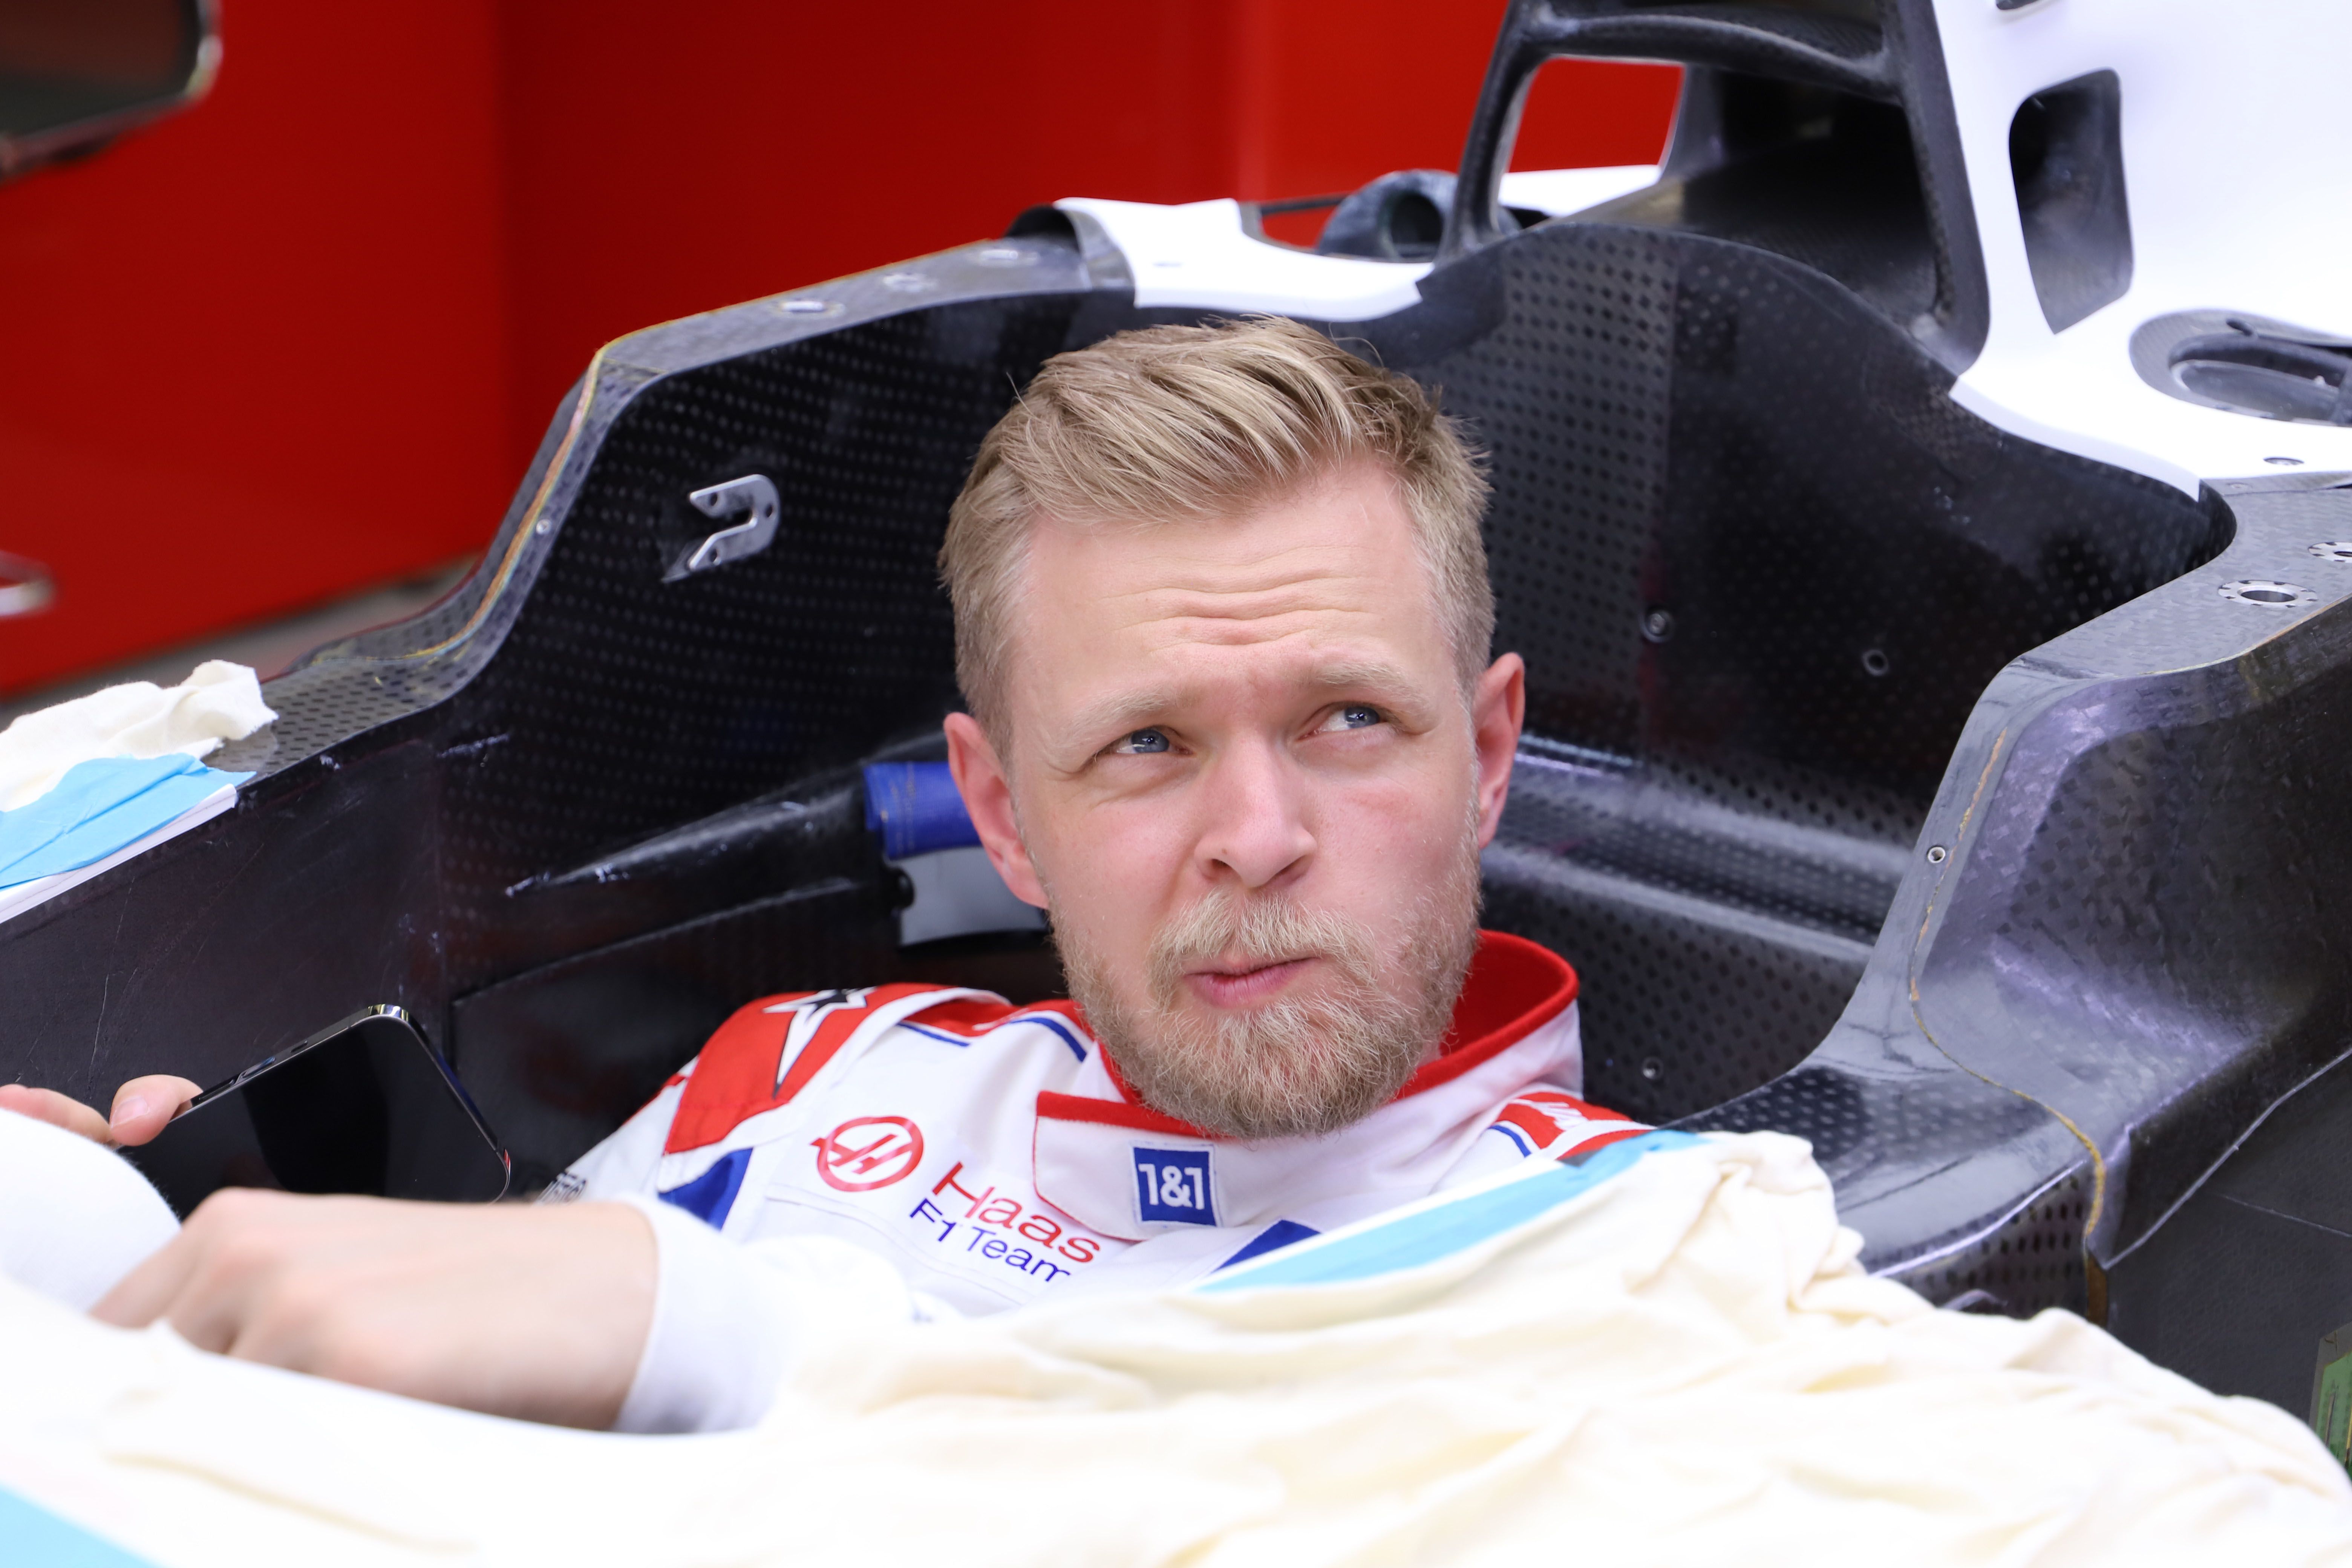 Kevin Magnussen - F1 Driver for Haas